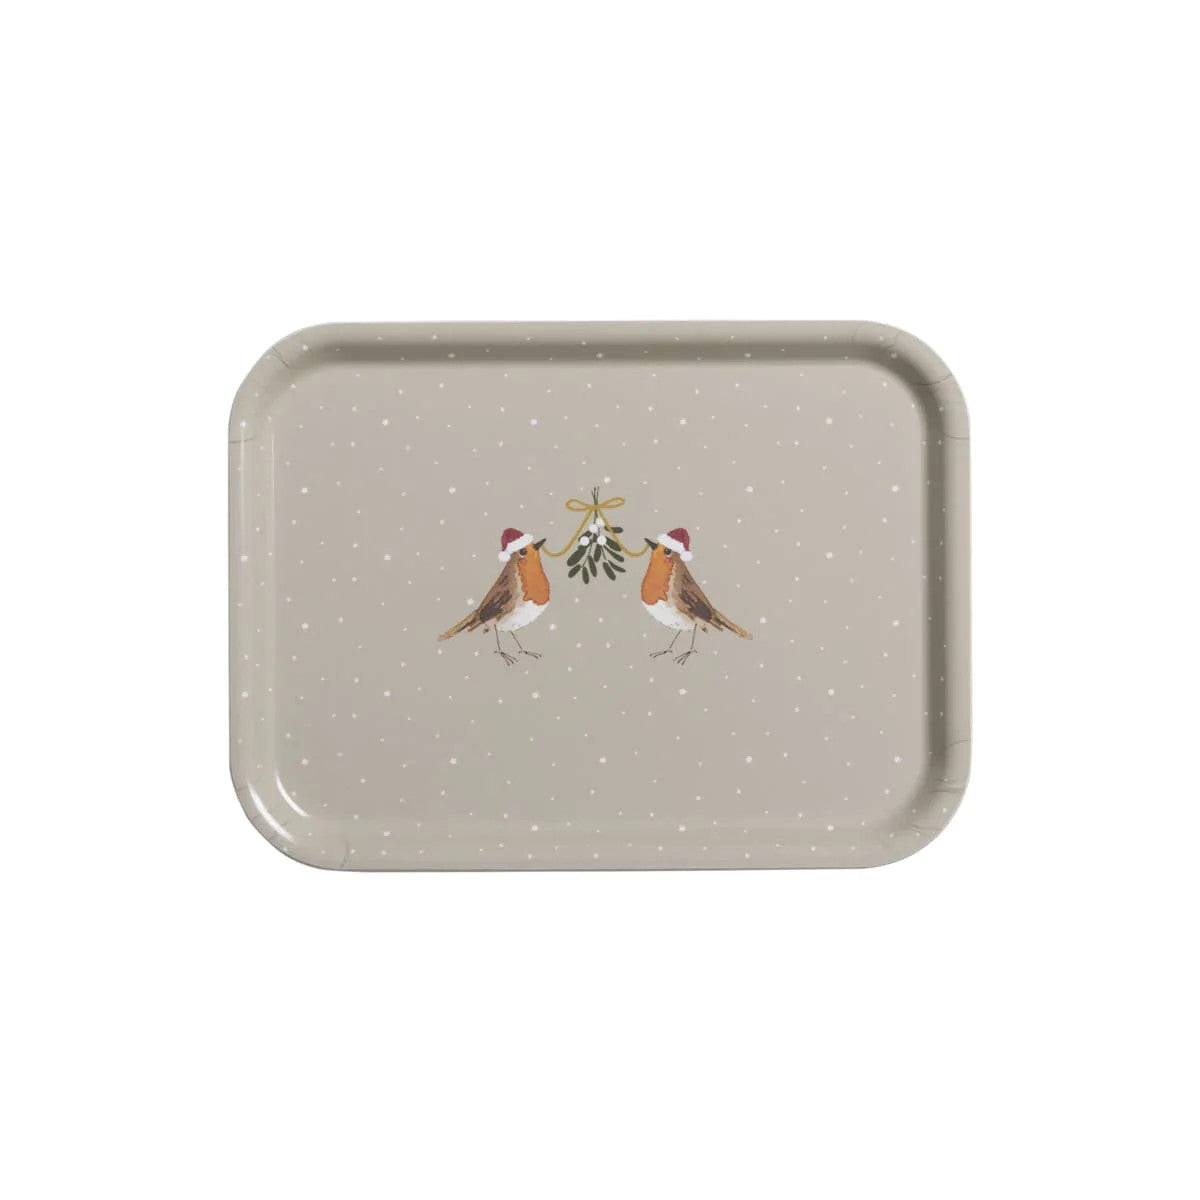 Sophie Allport Robins Small Tray.